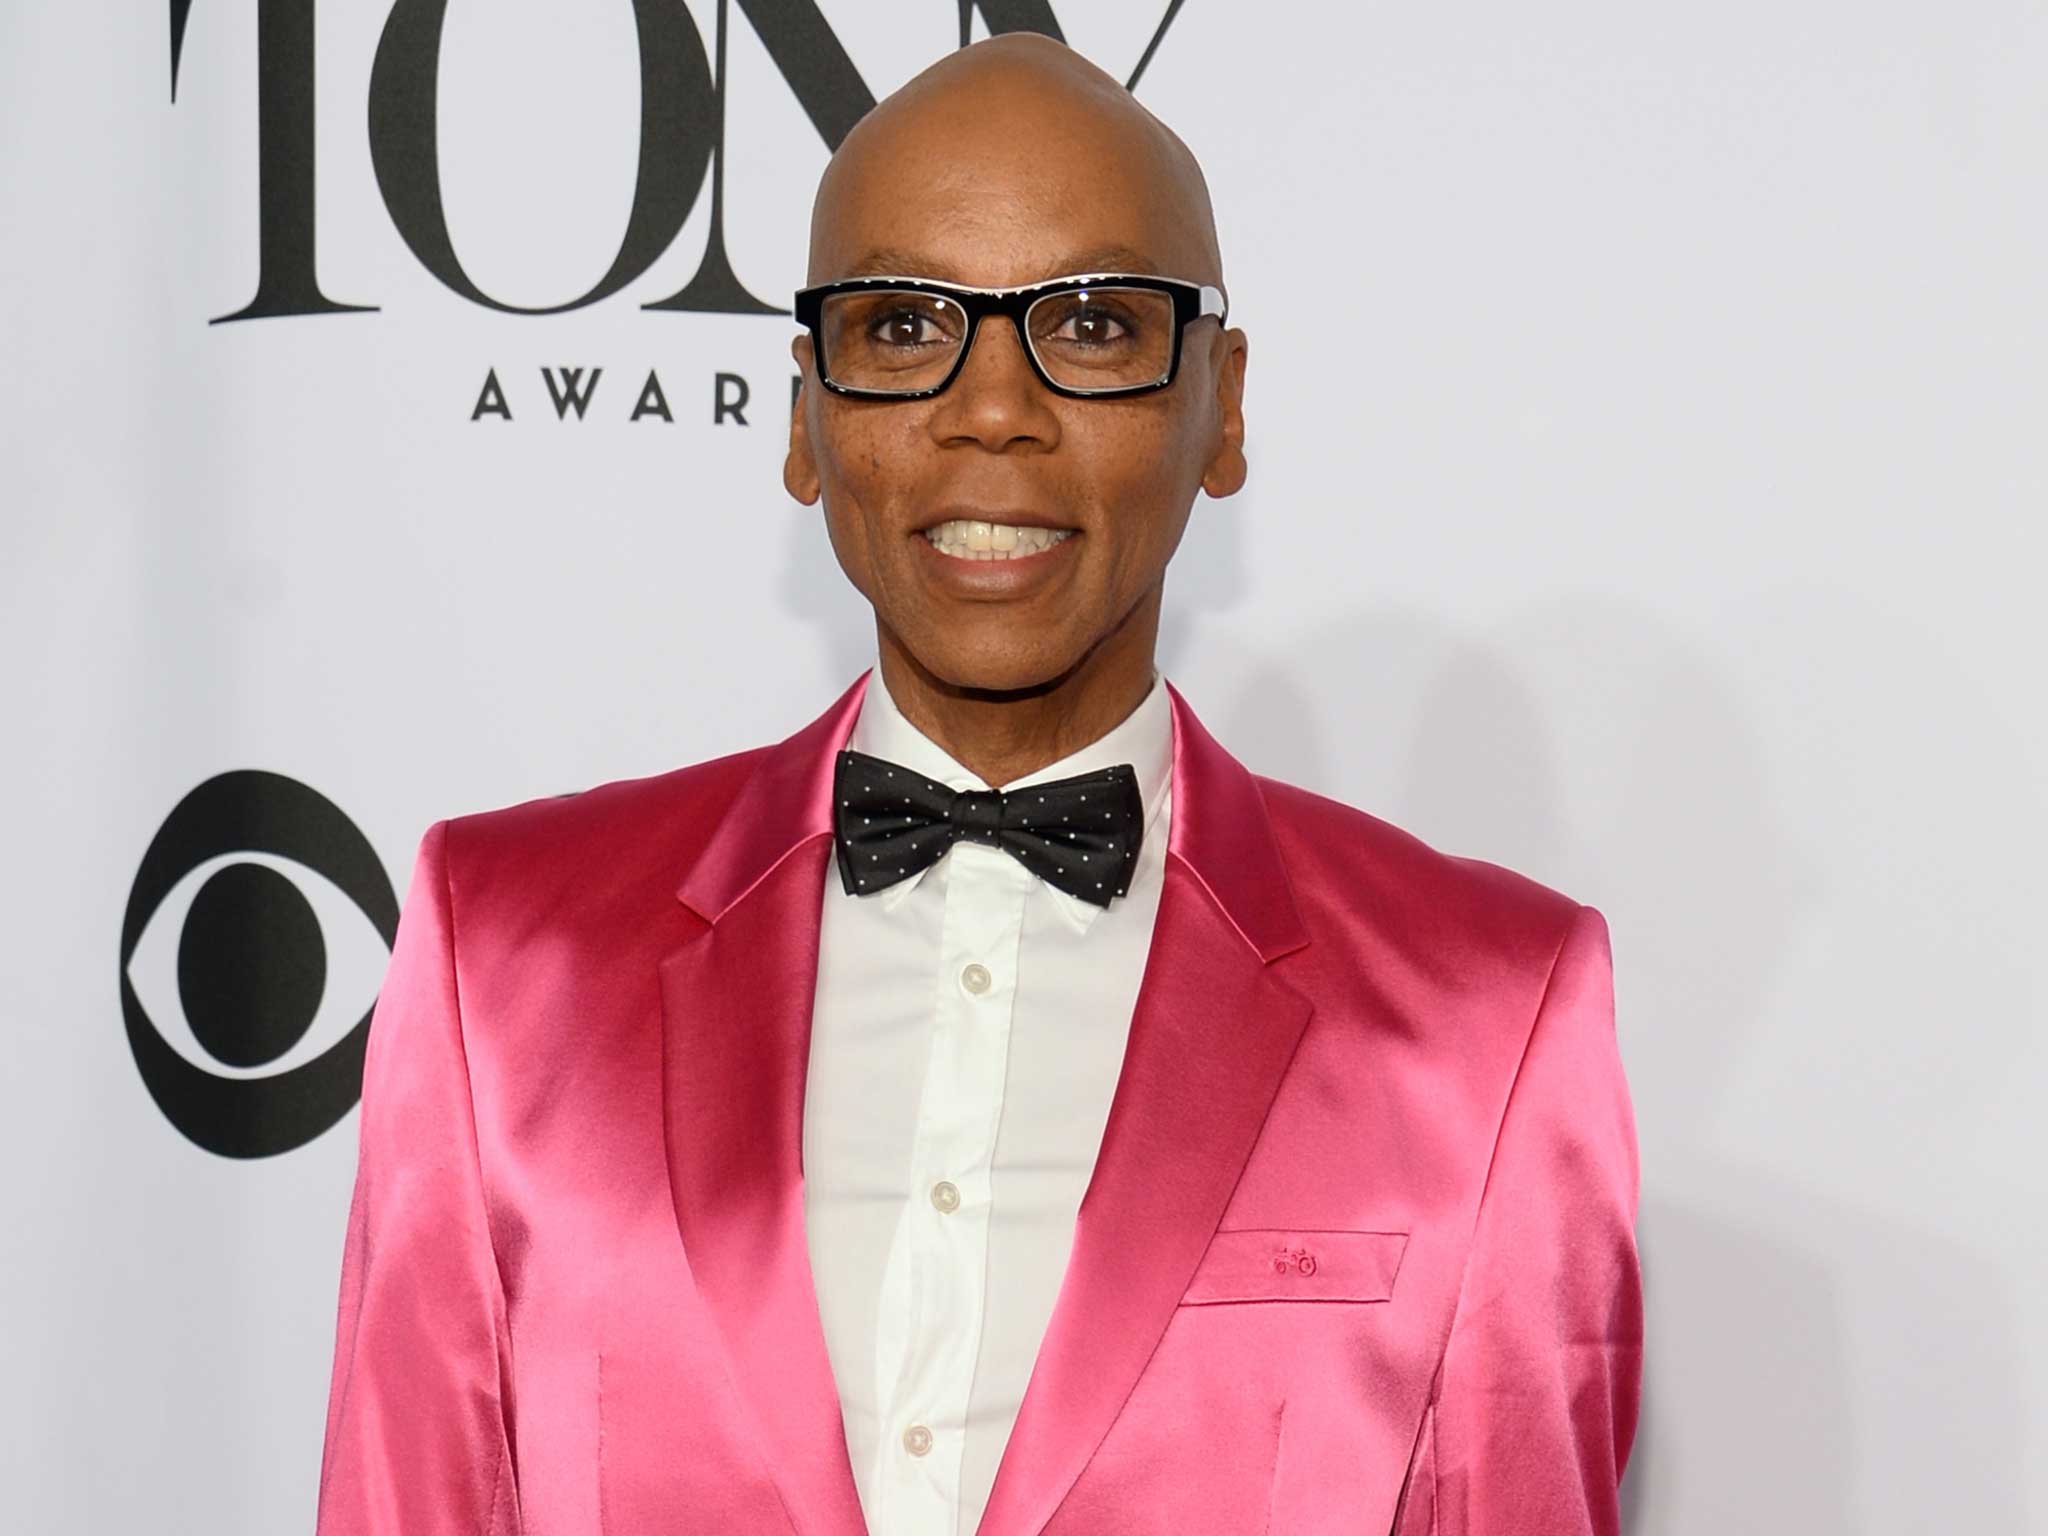 RuPaul has said people need to love themselves